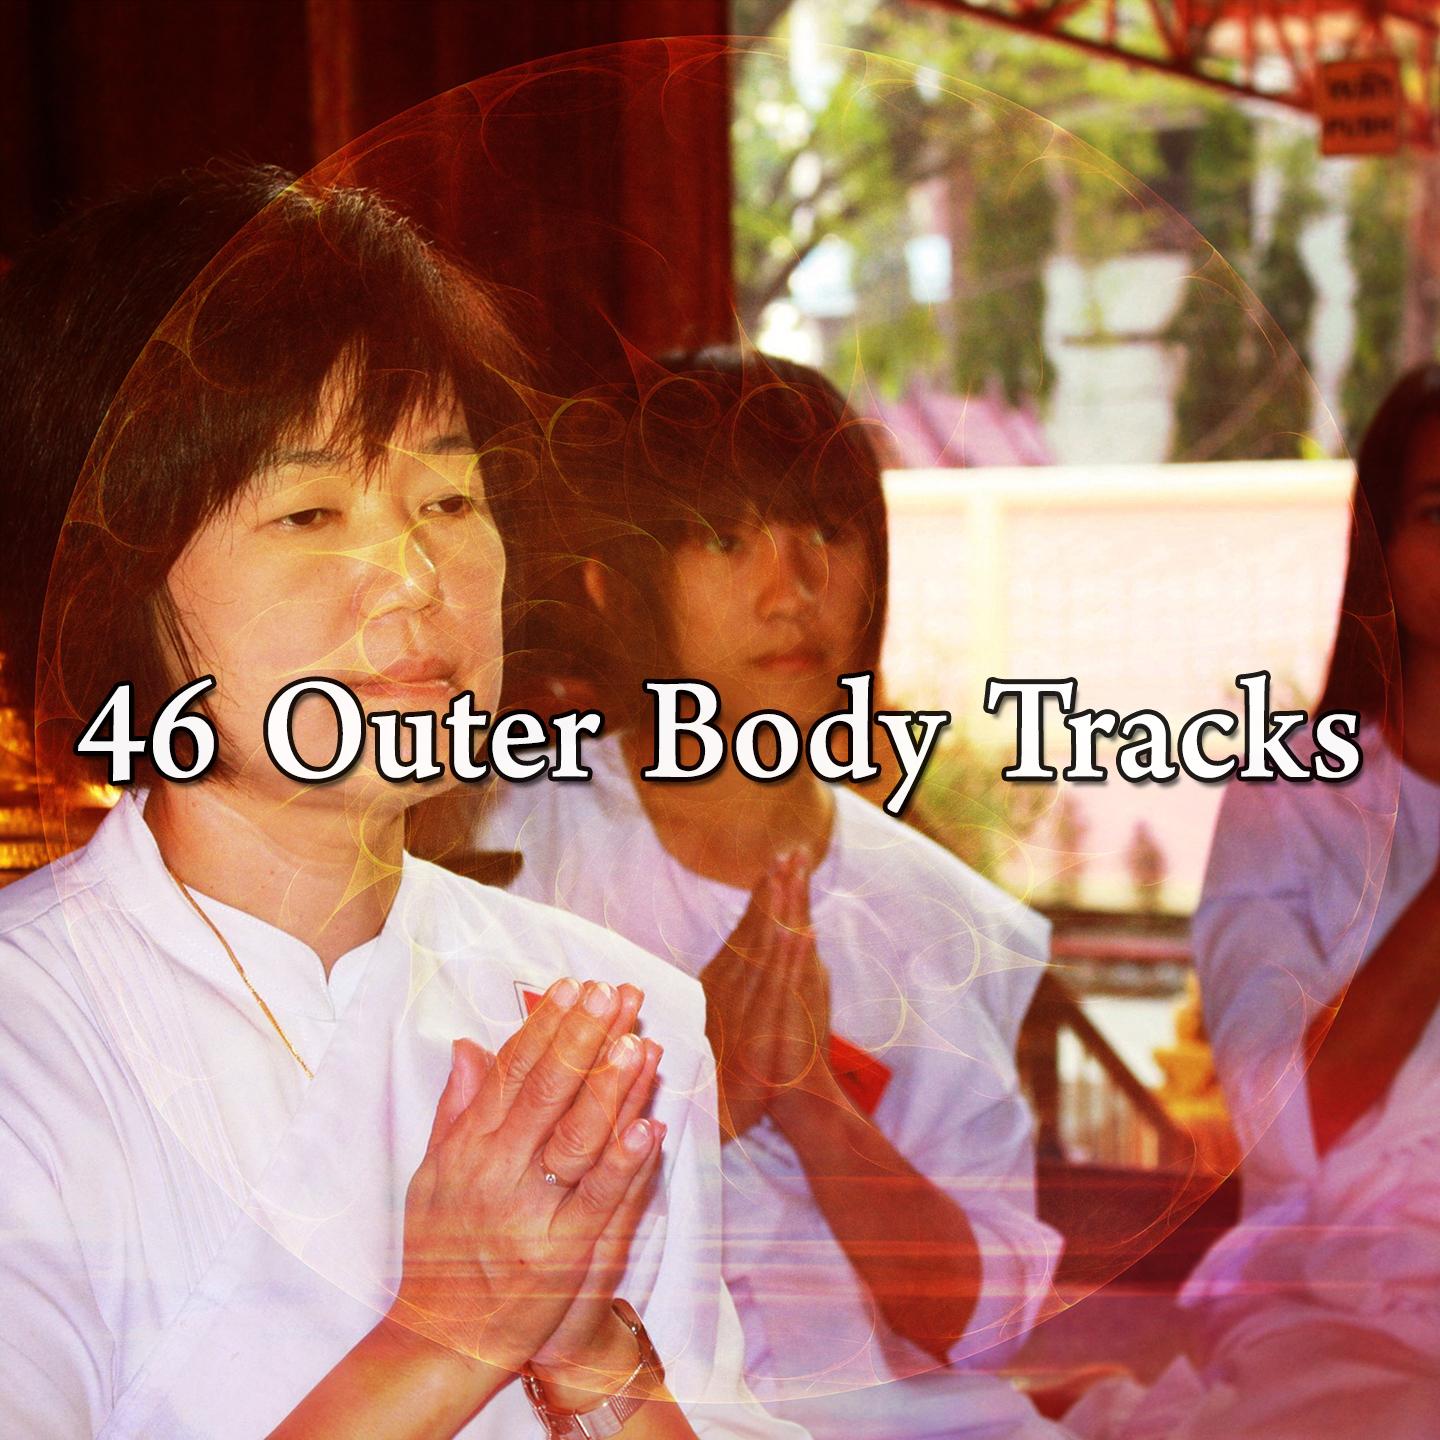 46 Outer Body Tracks